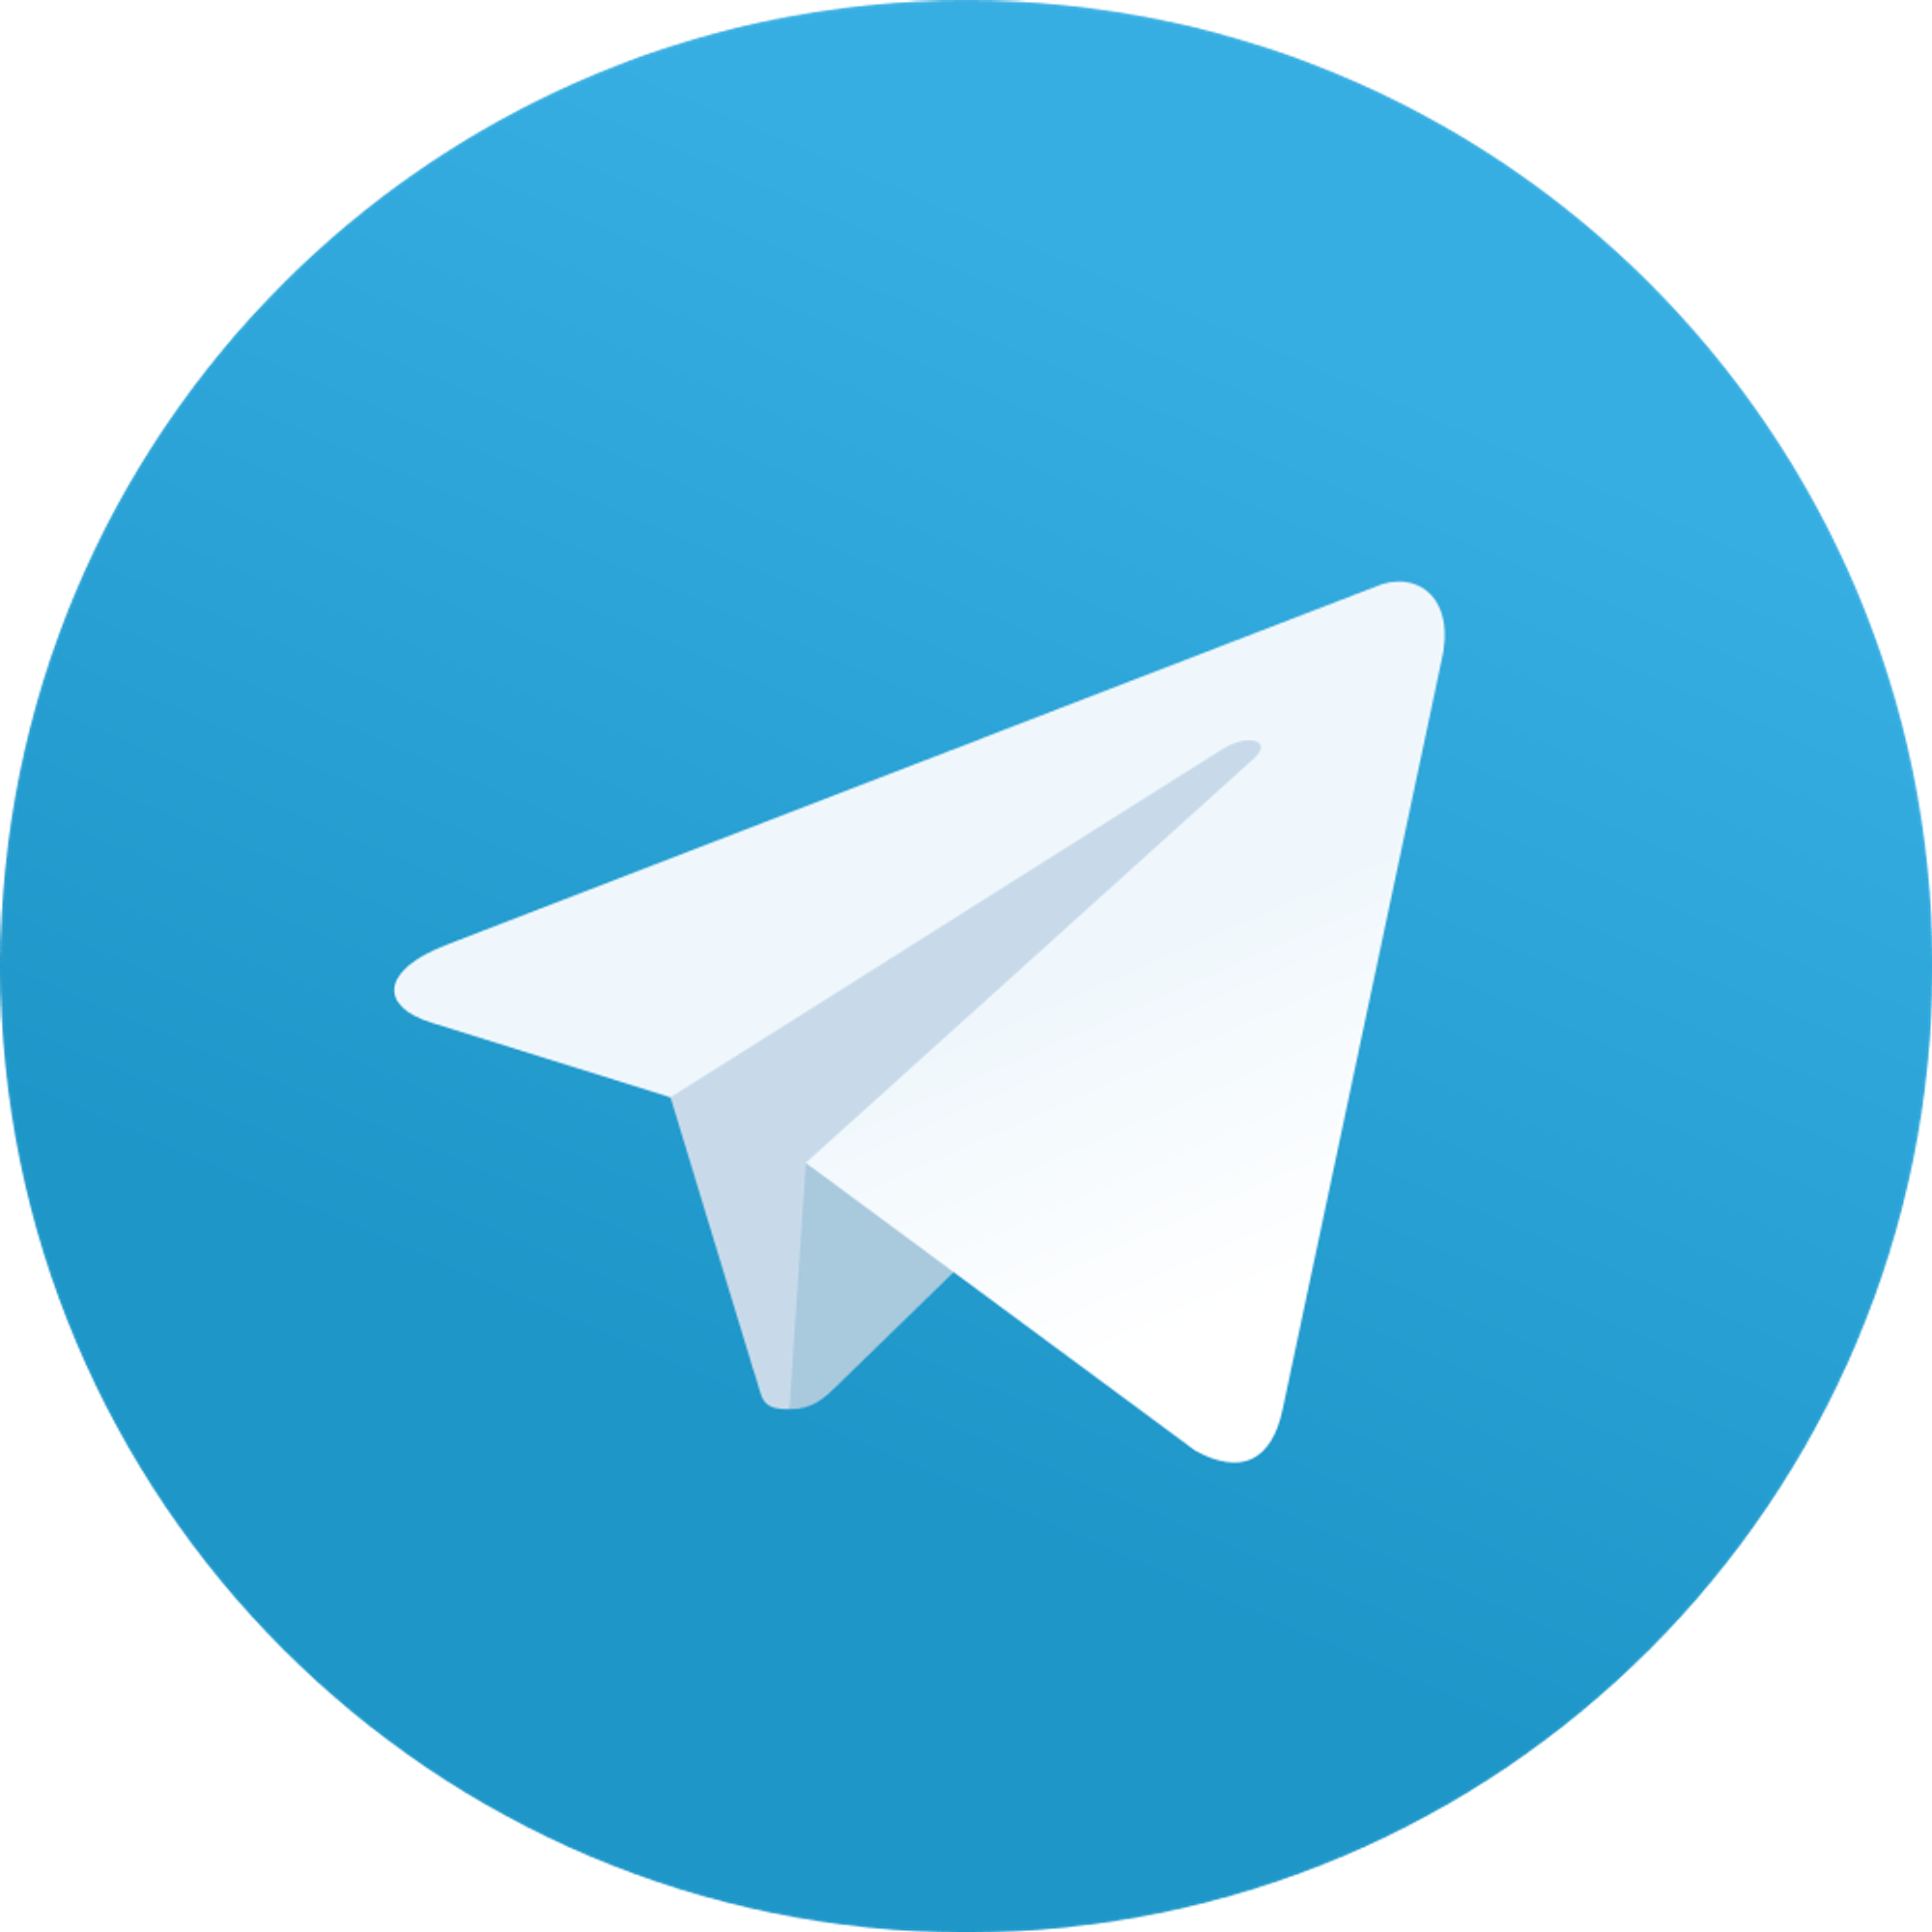 Contact me by Telegram